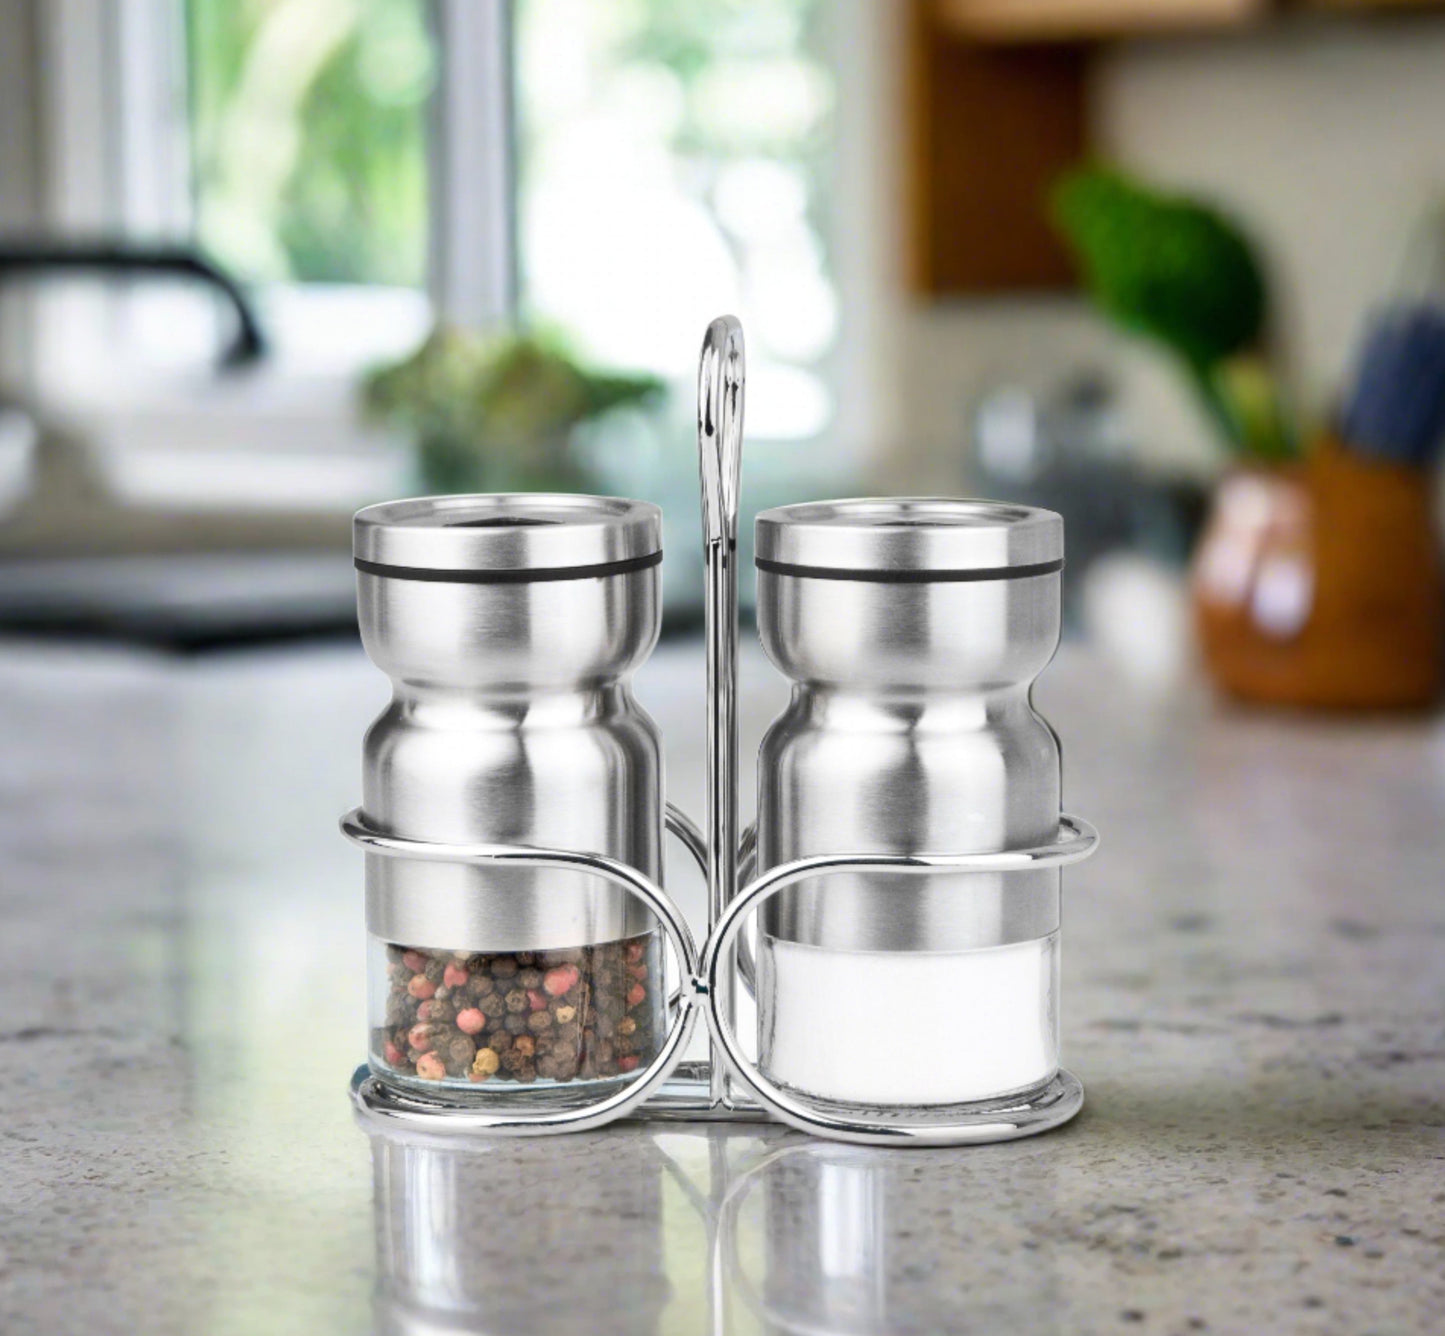 Cuisinox Salt and Pepper / Spice Shaker Set with caddy